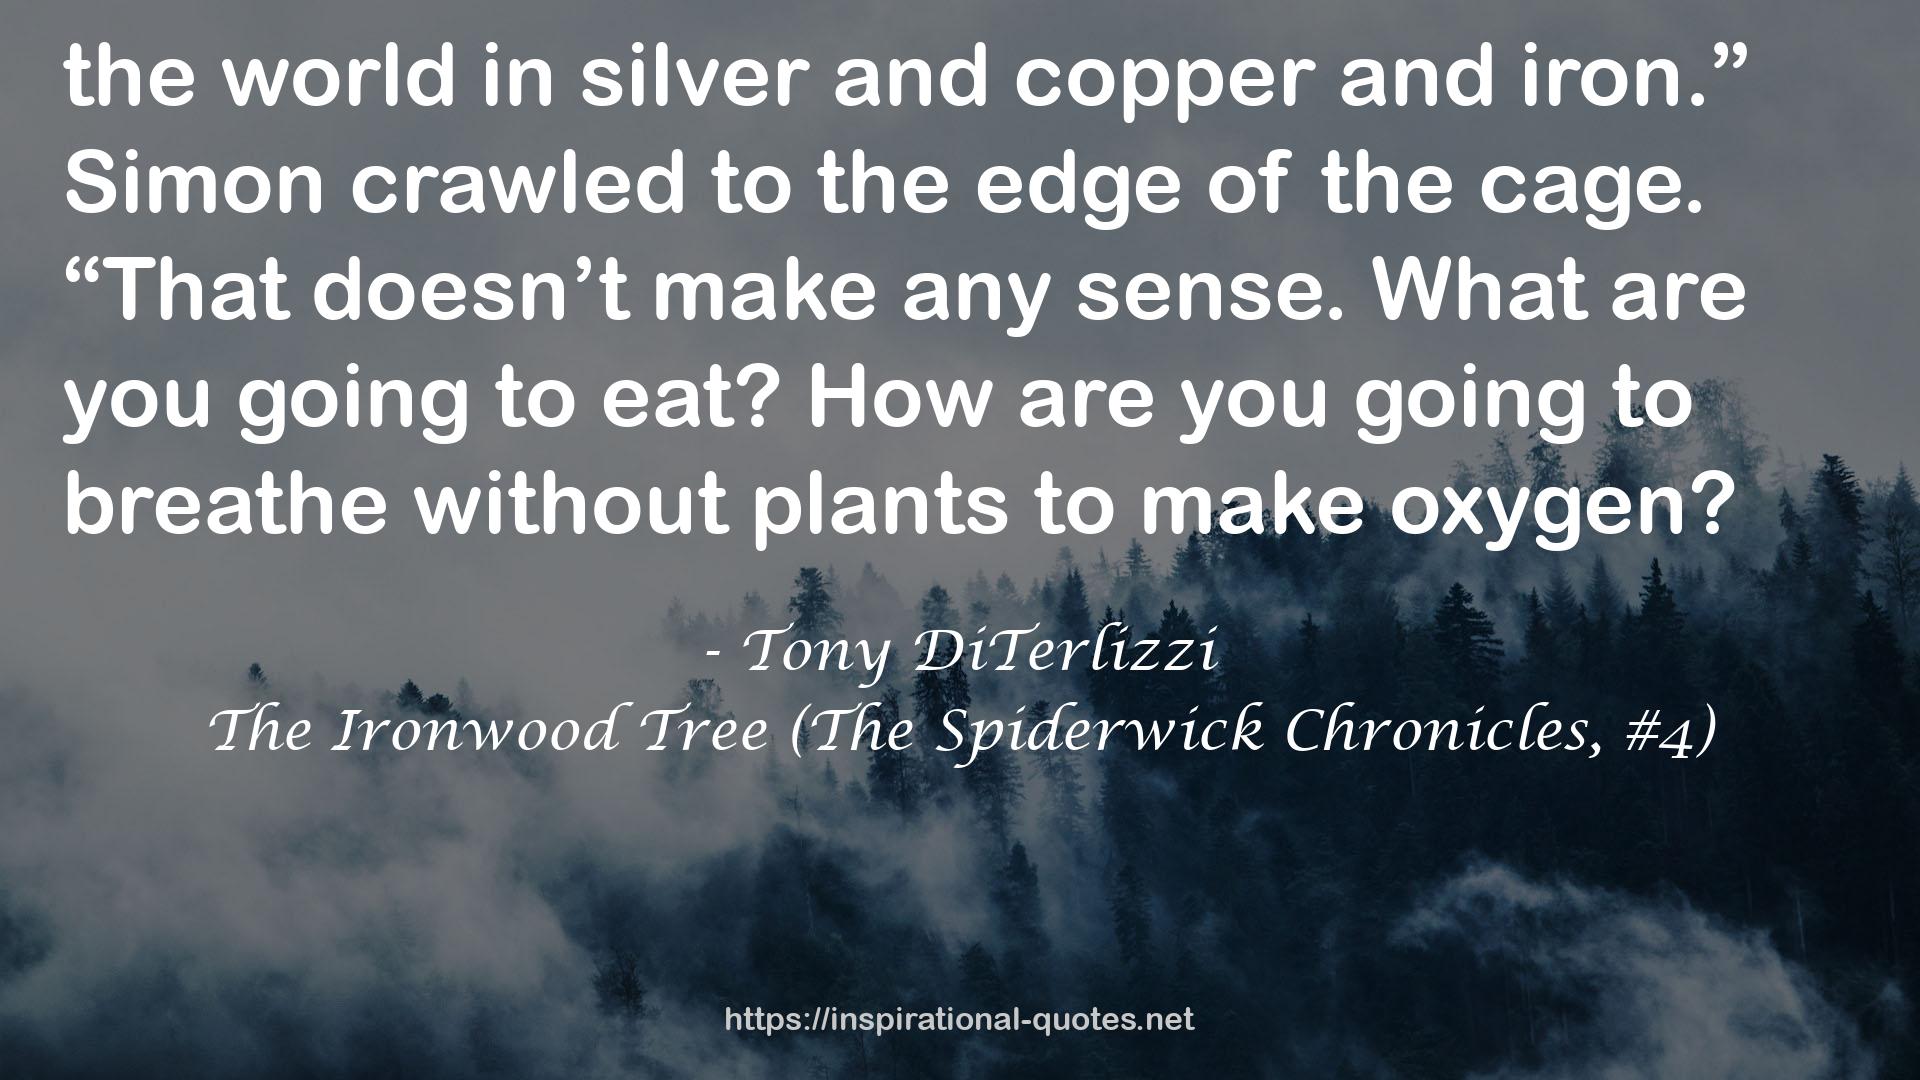 The Ironwood Tree (The Spiderwick Chronicles, #4) QUOTES